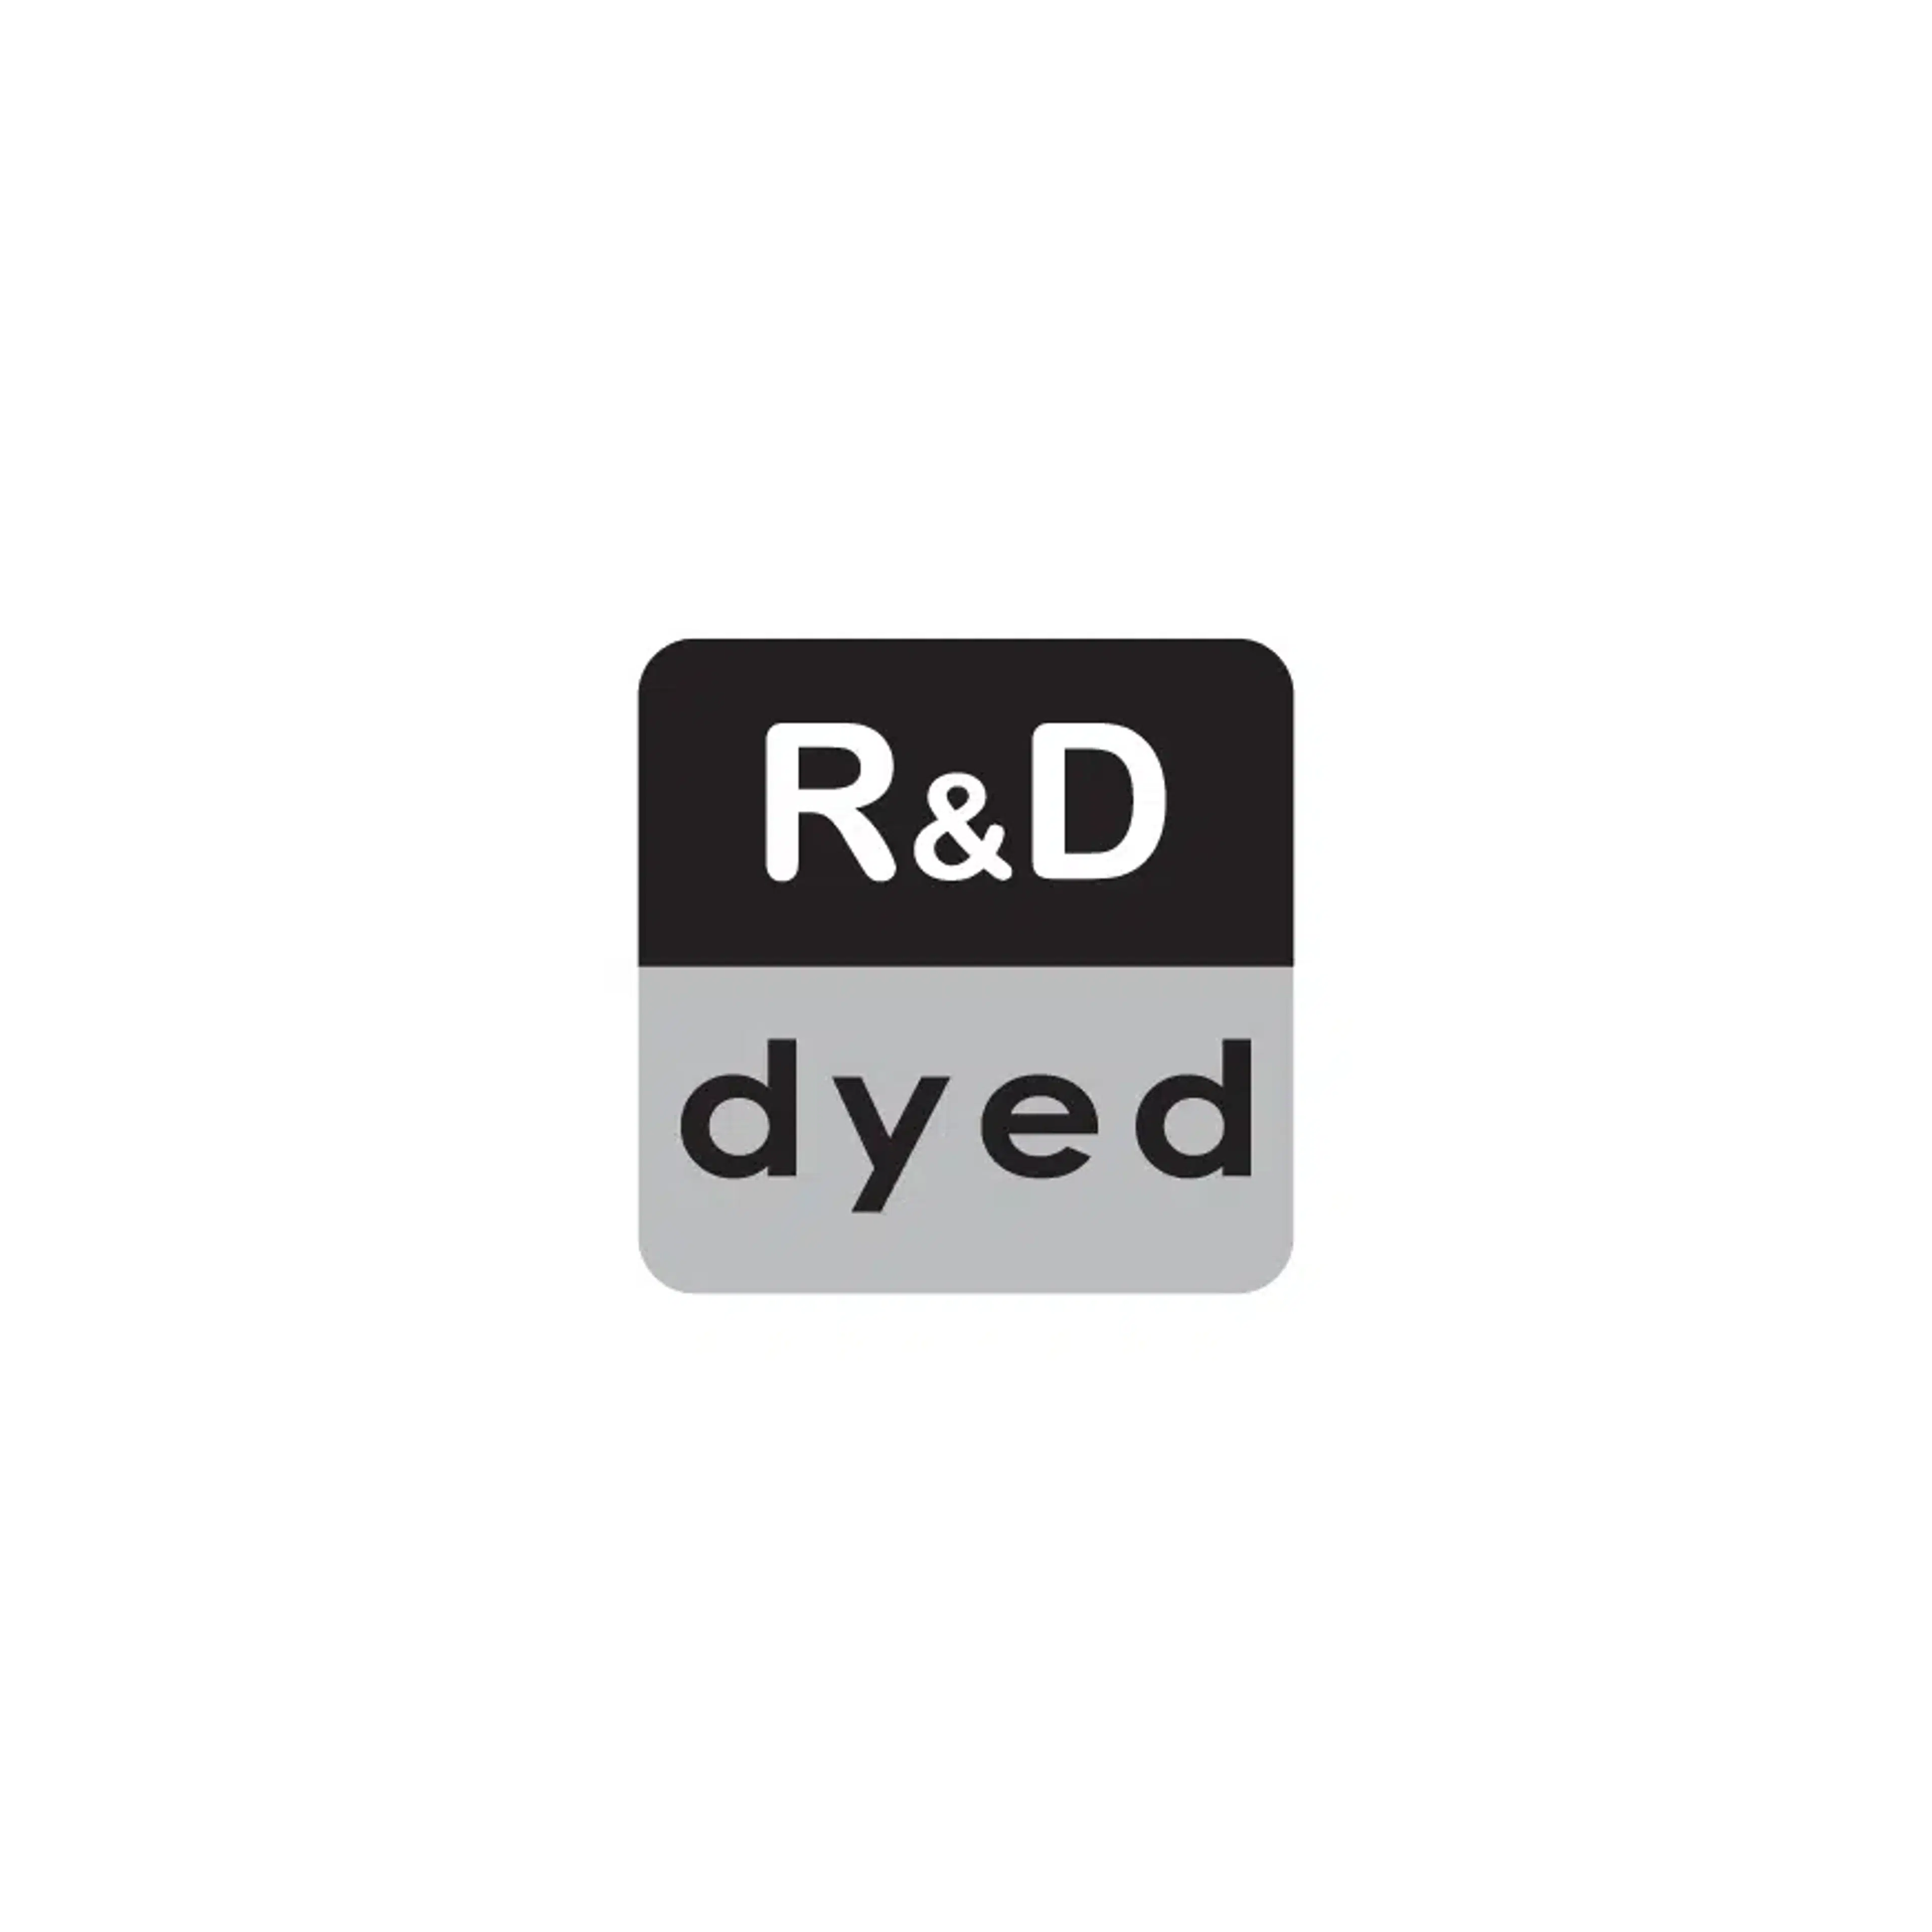 R&D Dyed